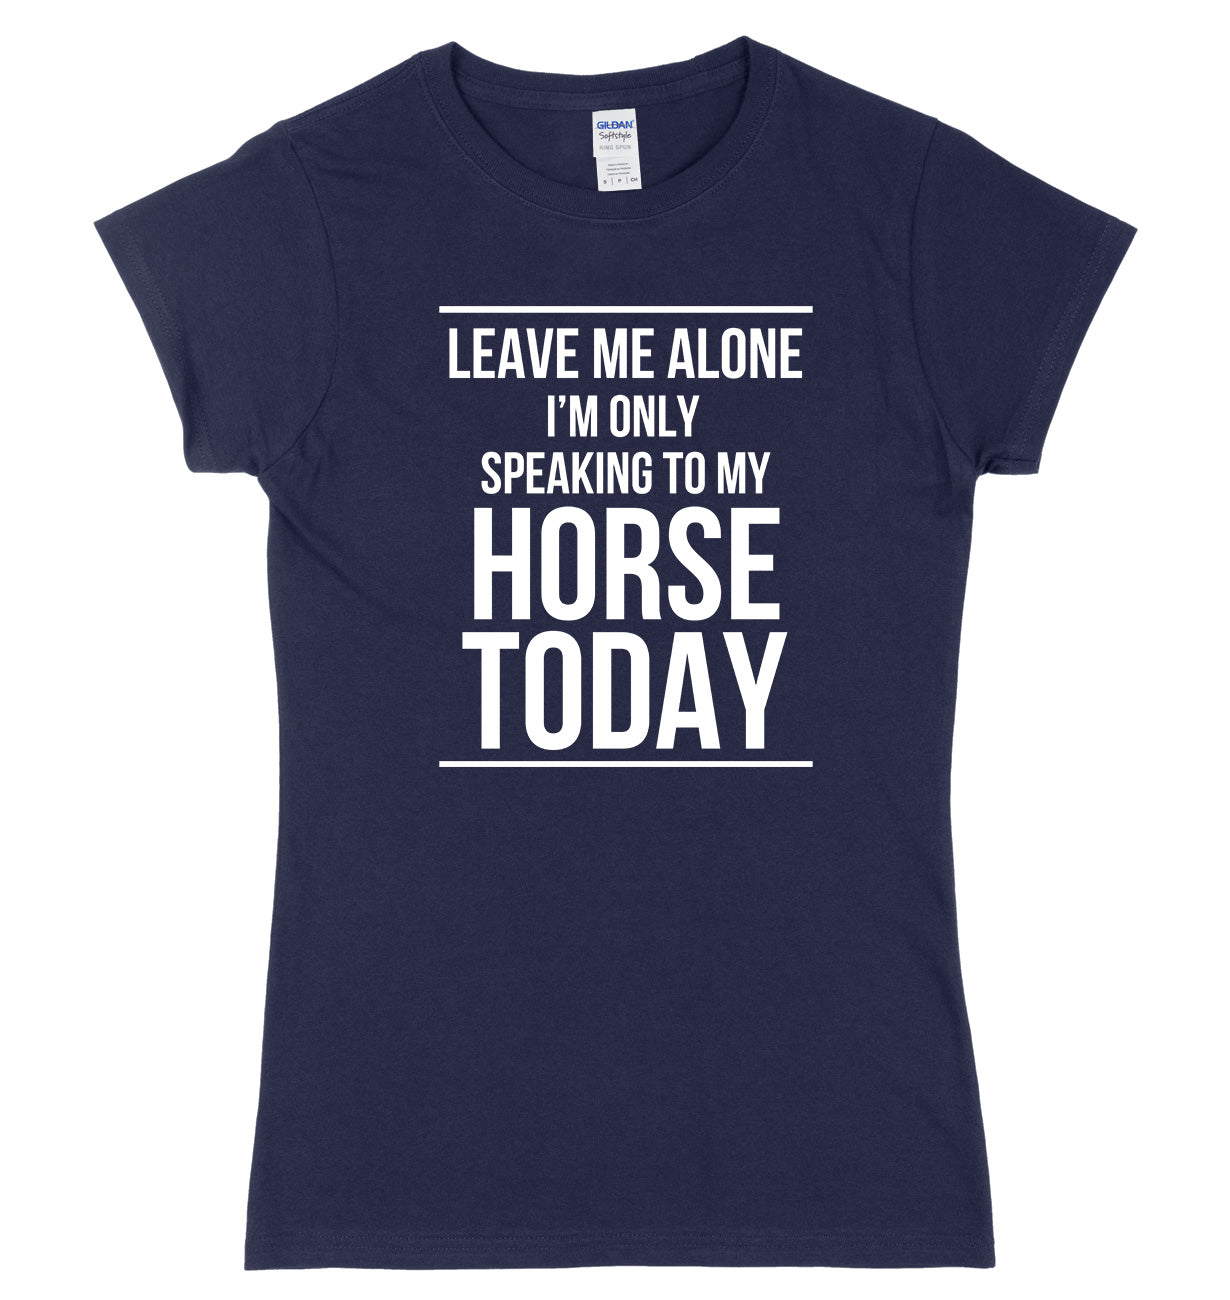 LEAVE ME ALONE I'M ONLY SPEAKING TO MY HORSE TODAY FUNNY WOMENS LADIES SLIM FIT  T-SHIRT